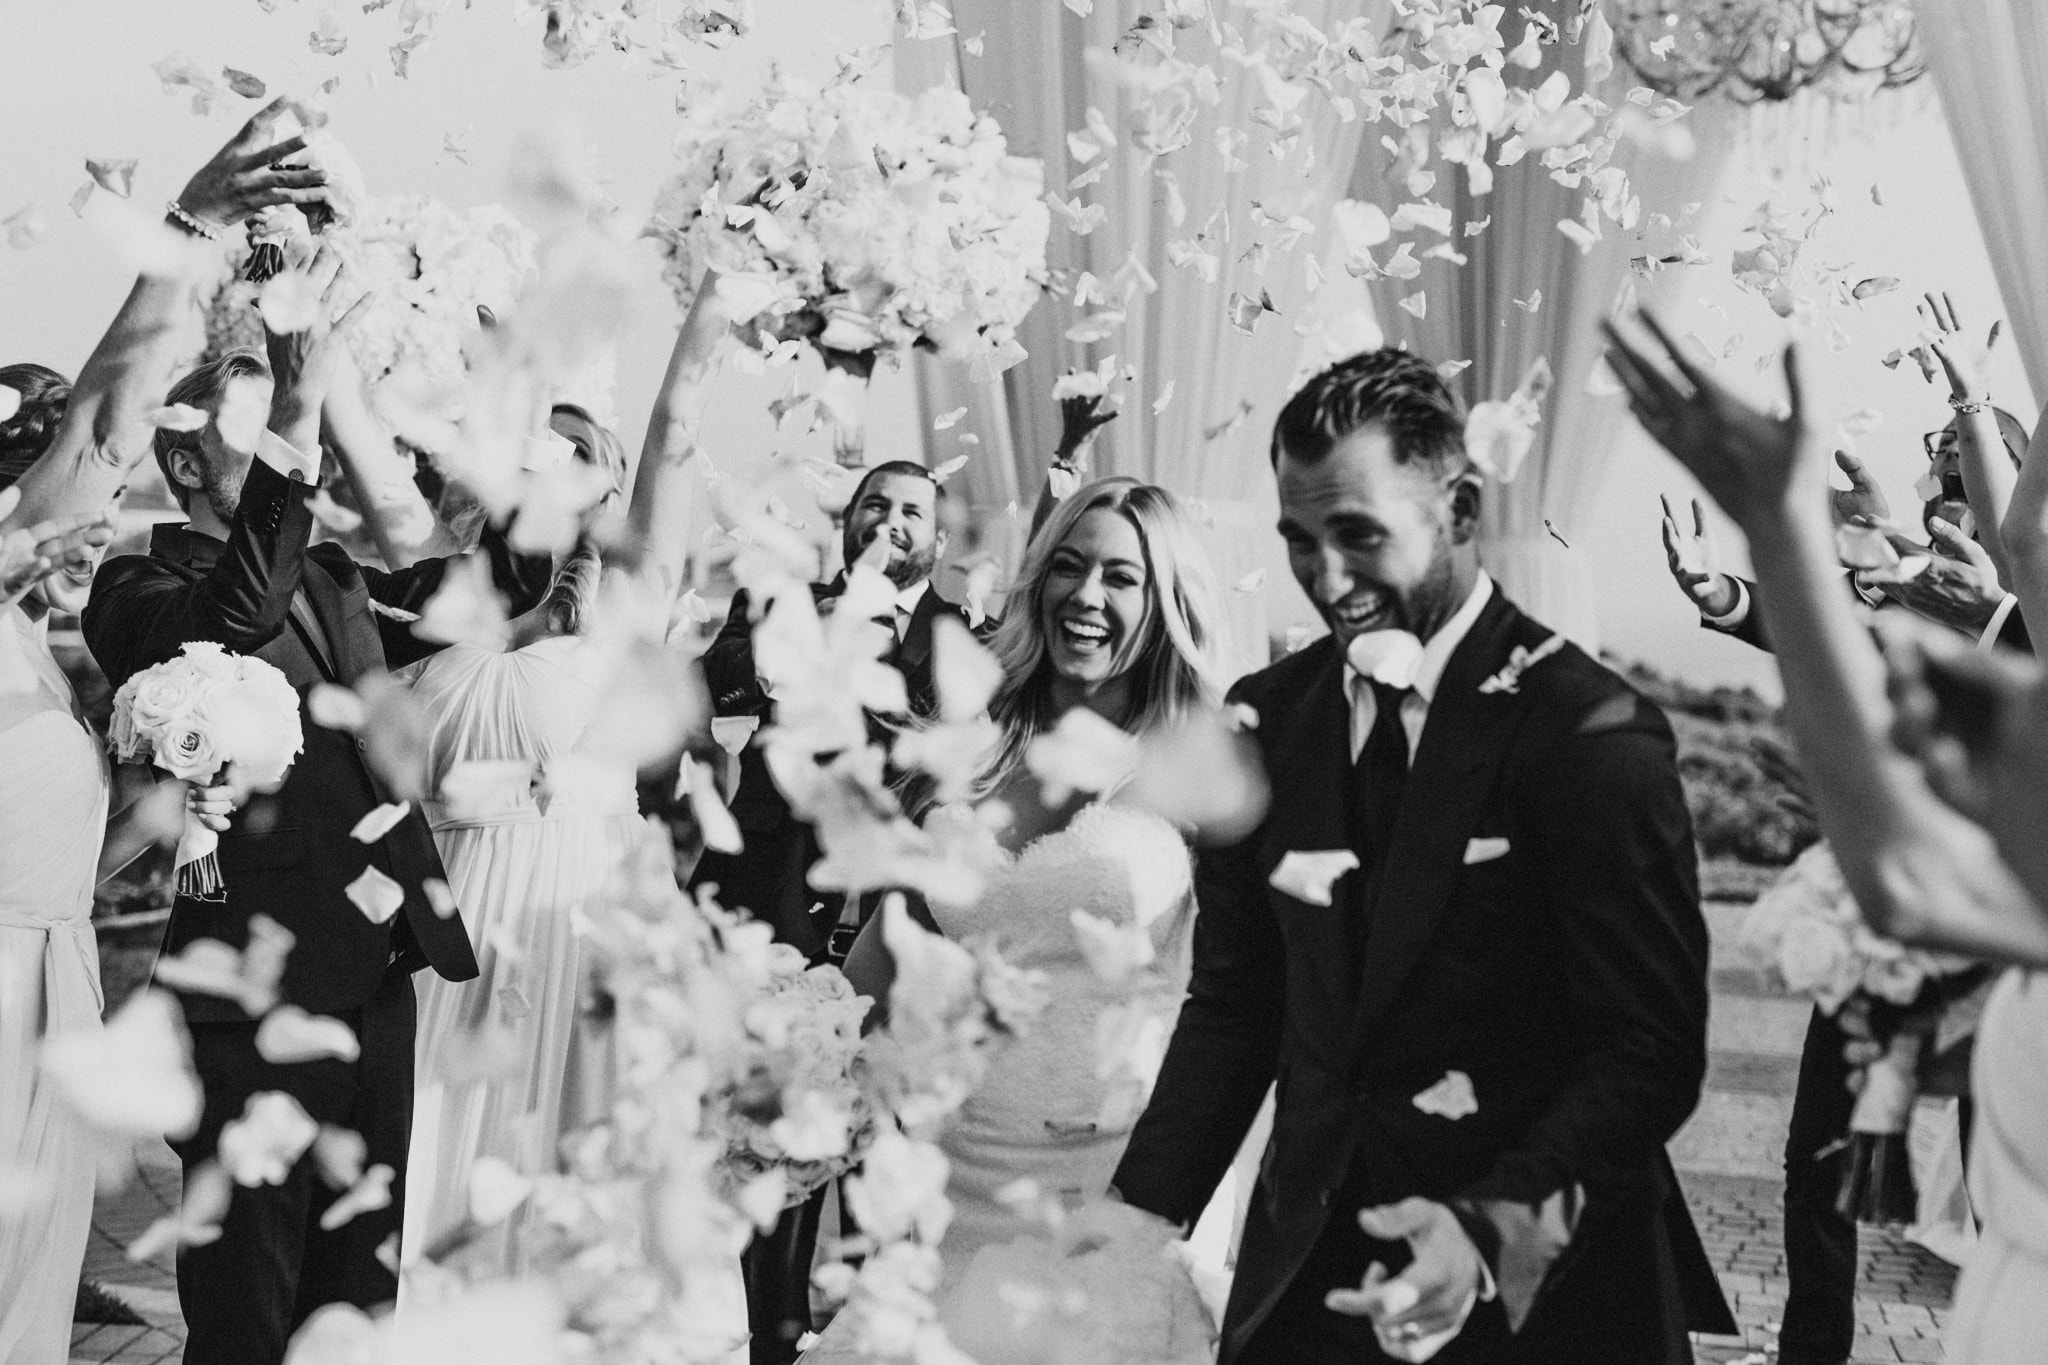 Guests throw petals as a happy bride and groom walk up the aisle during their Newport Beach wedding.